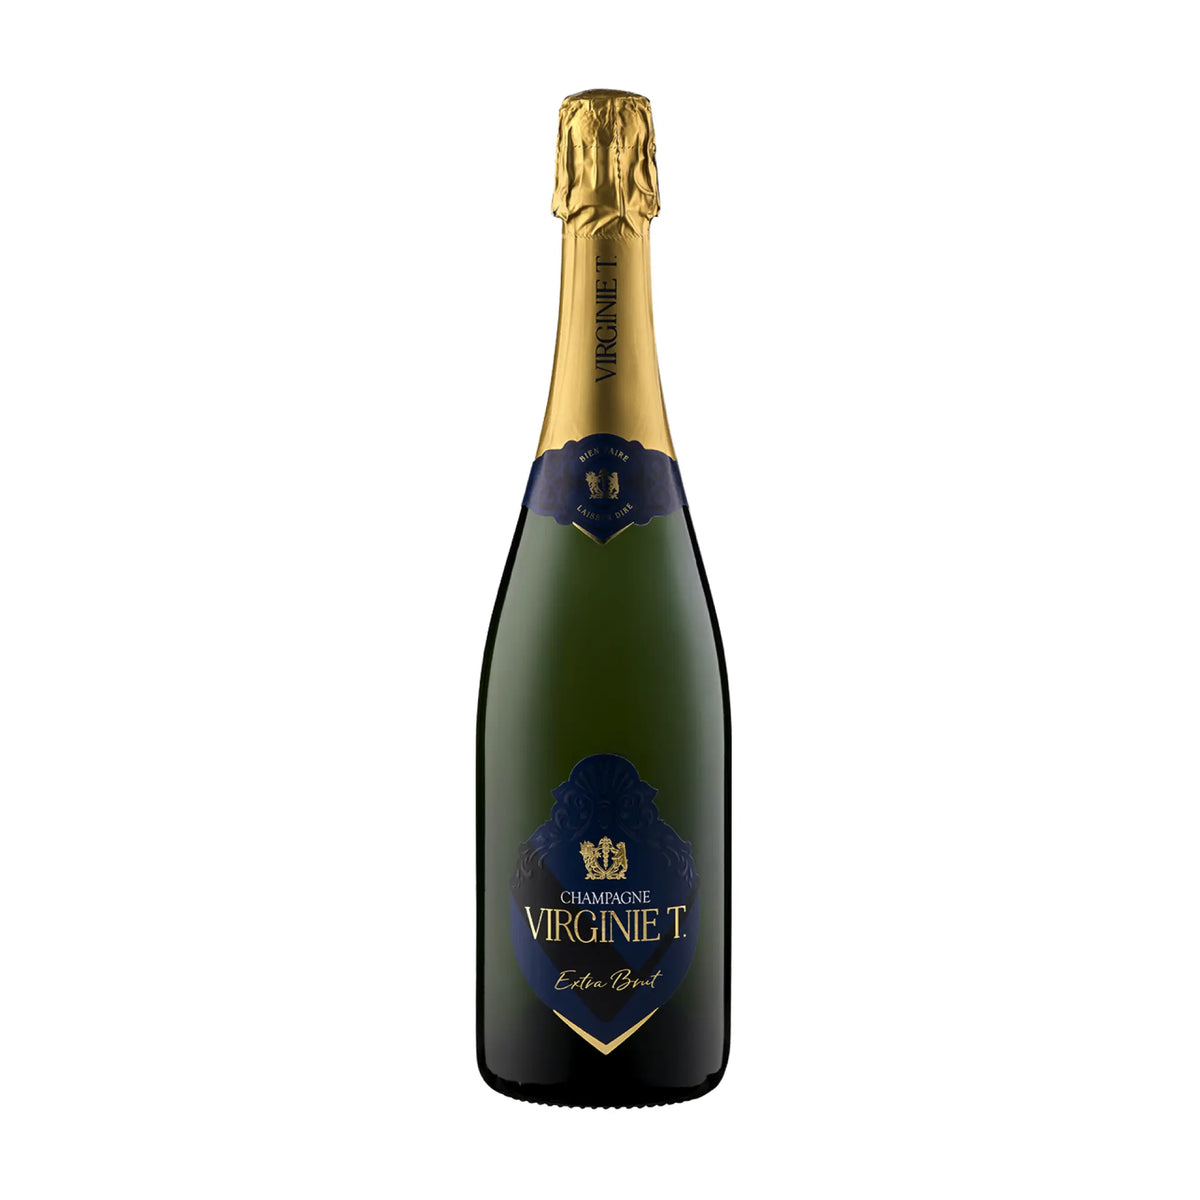 Champagne Virginie T.-Champagner-Champagner-Frankreich-Champagne-Champagne Virginie T. Extra Brut-WINECOM